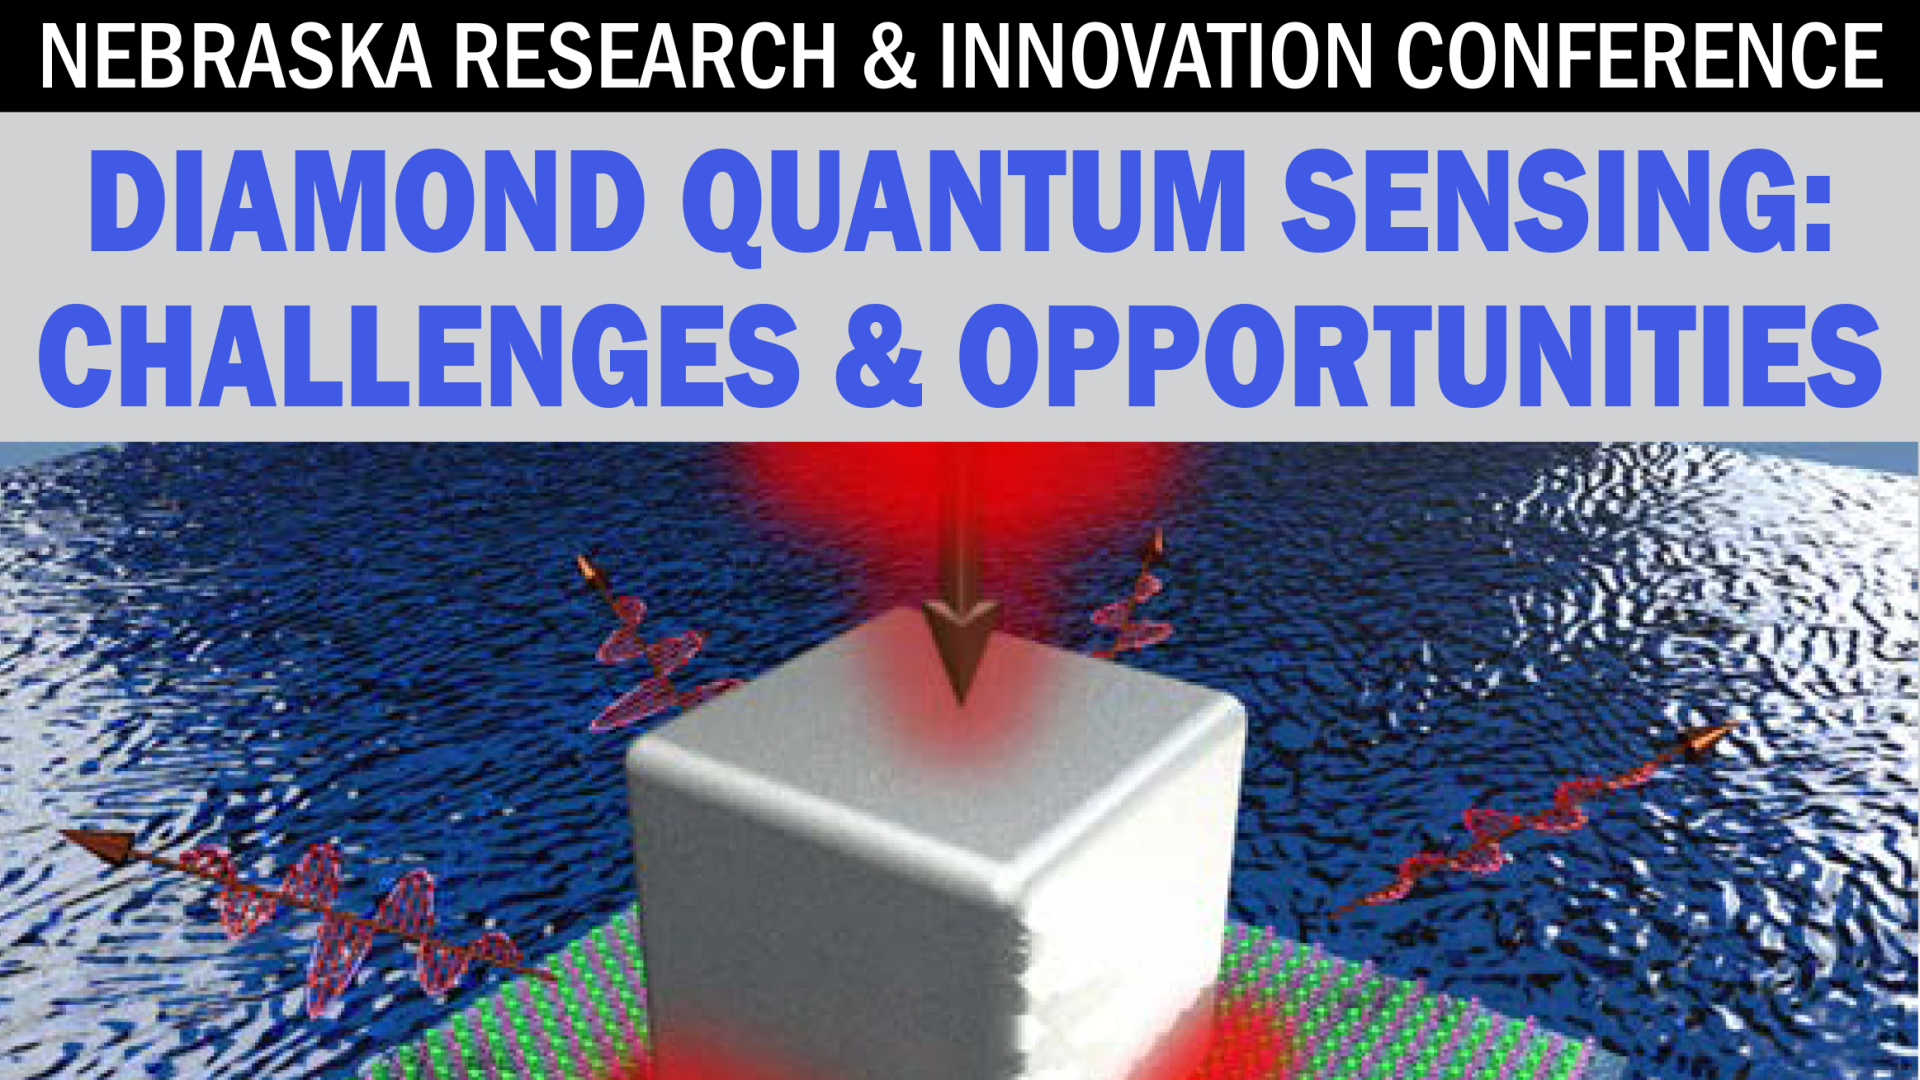 Nebraska Research and Innovation Conference: Diamond Quantum Sensing - Challenges and Opportunities.